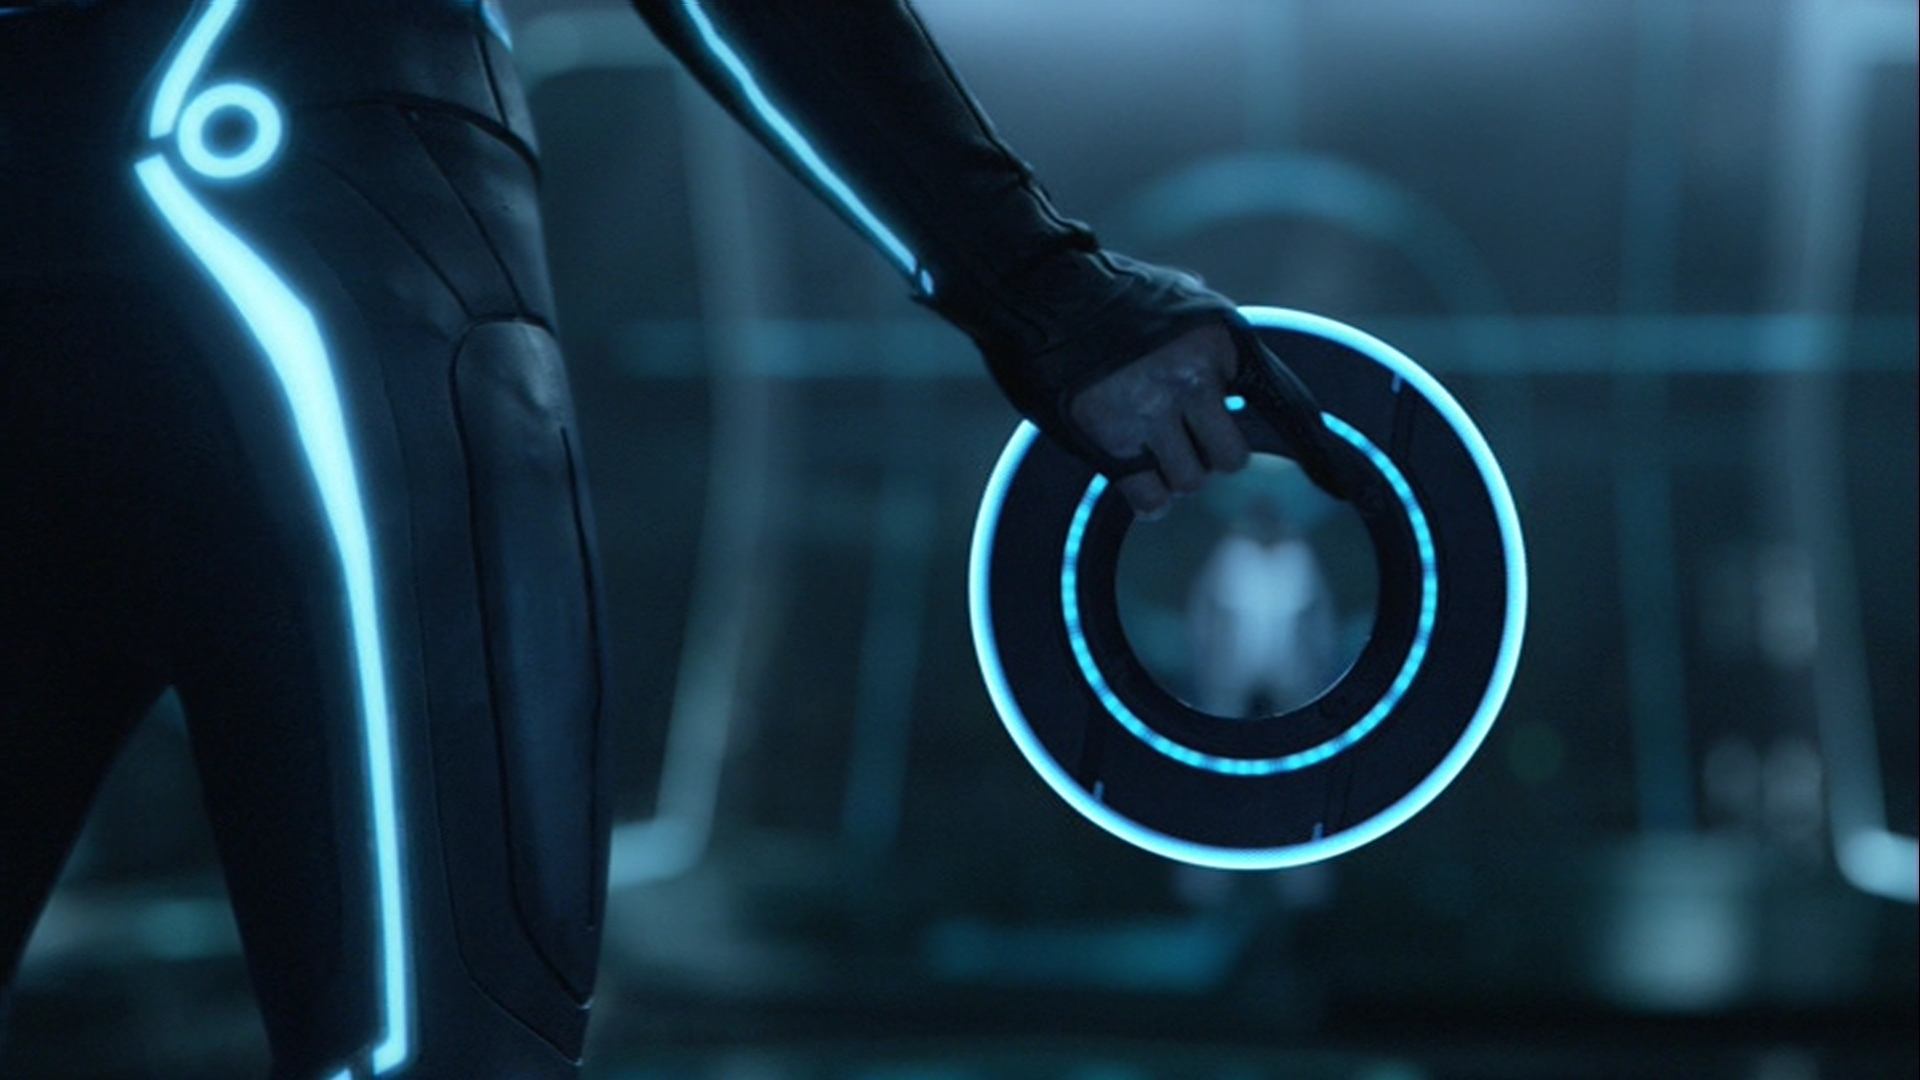 Tron Legacy Image Wallpaper HD And